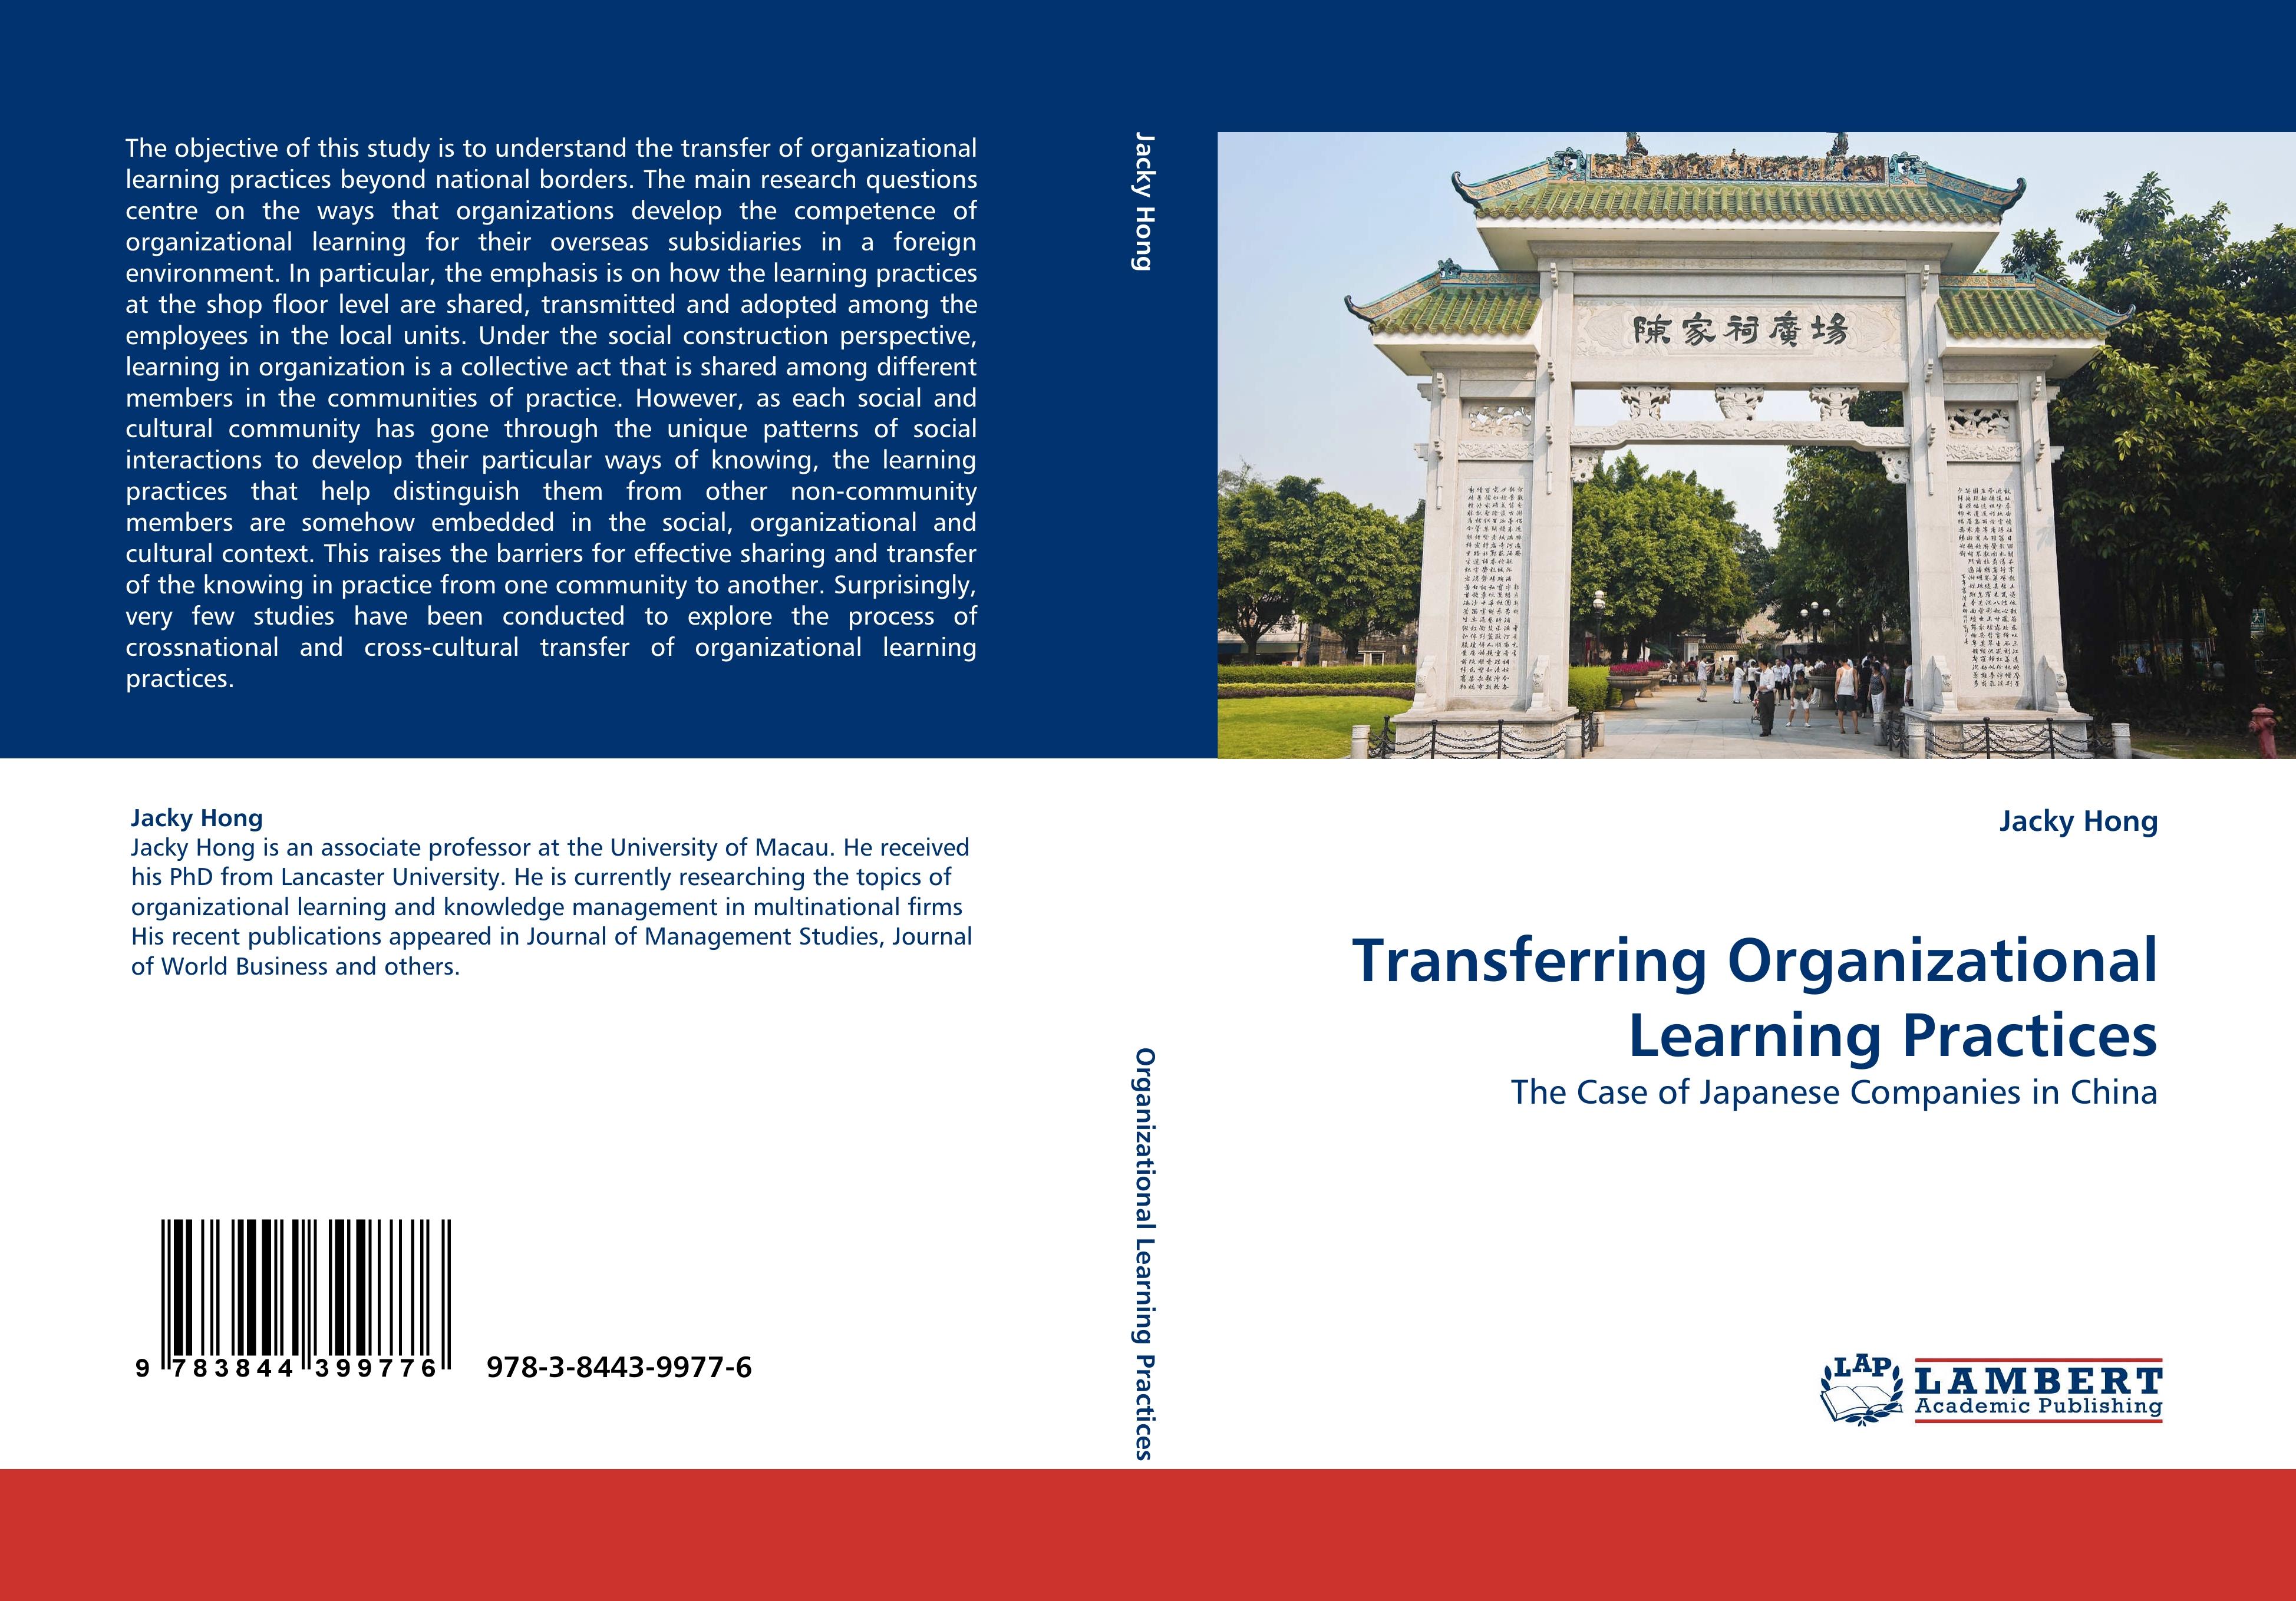 Transferring Organizational Learning Practices - Jacky Hong